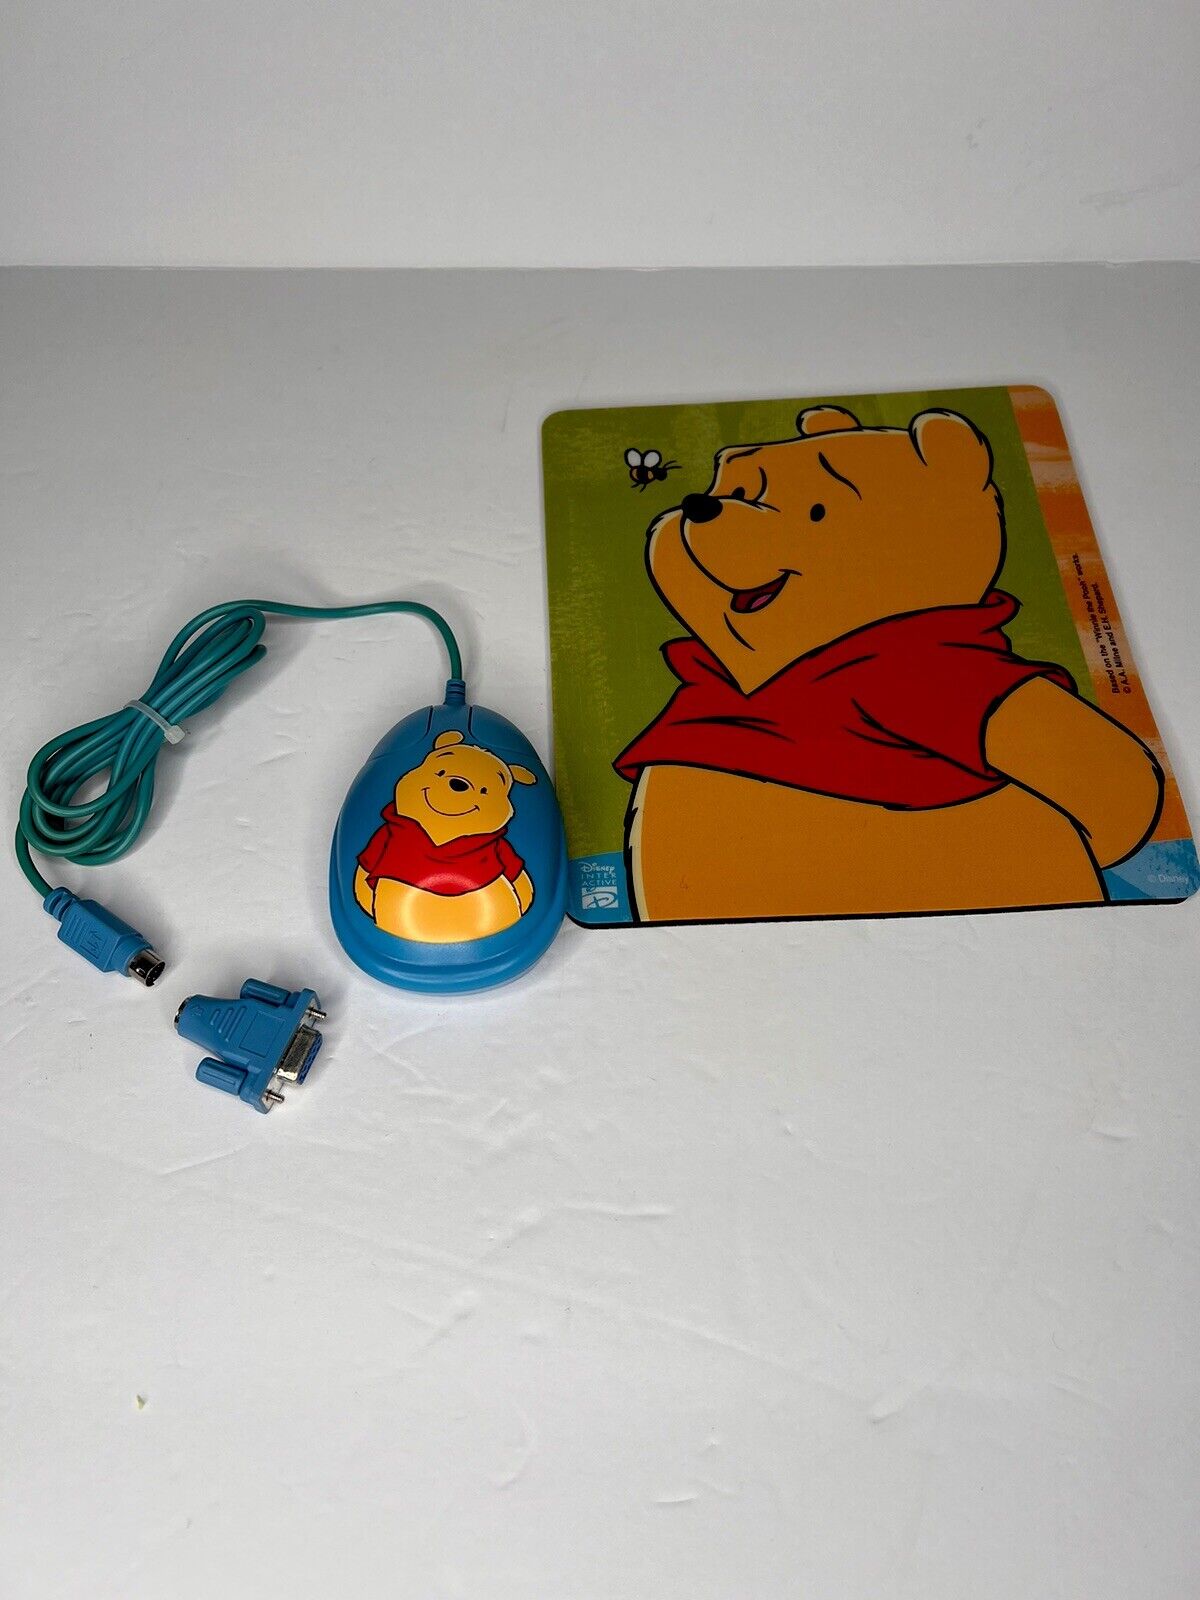 Rare Disney Winnie The Pooh Mouse PS/2 Computer Ball Mouse Vintage Disney & Pad